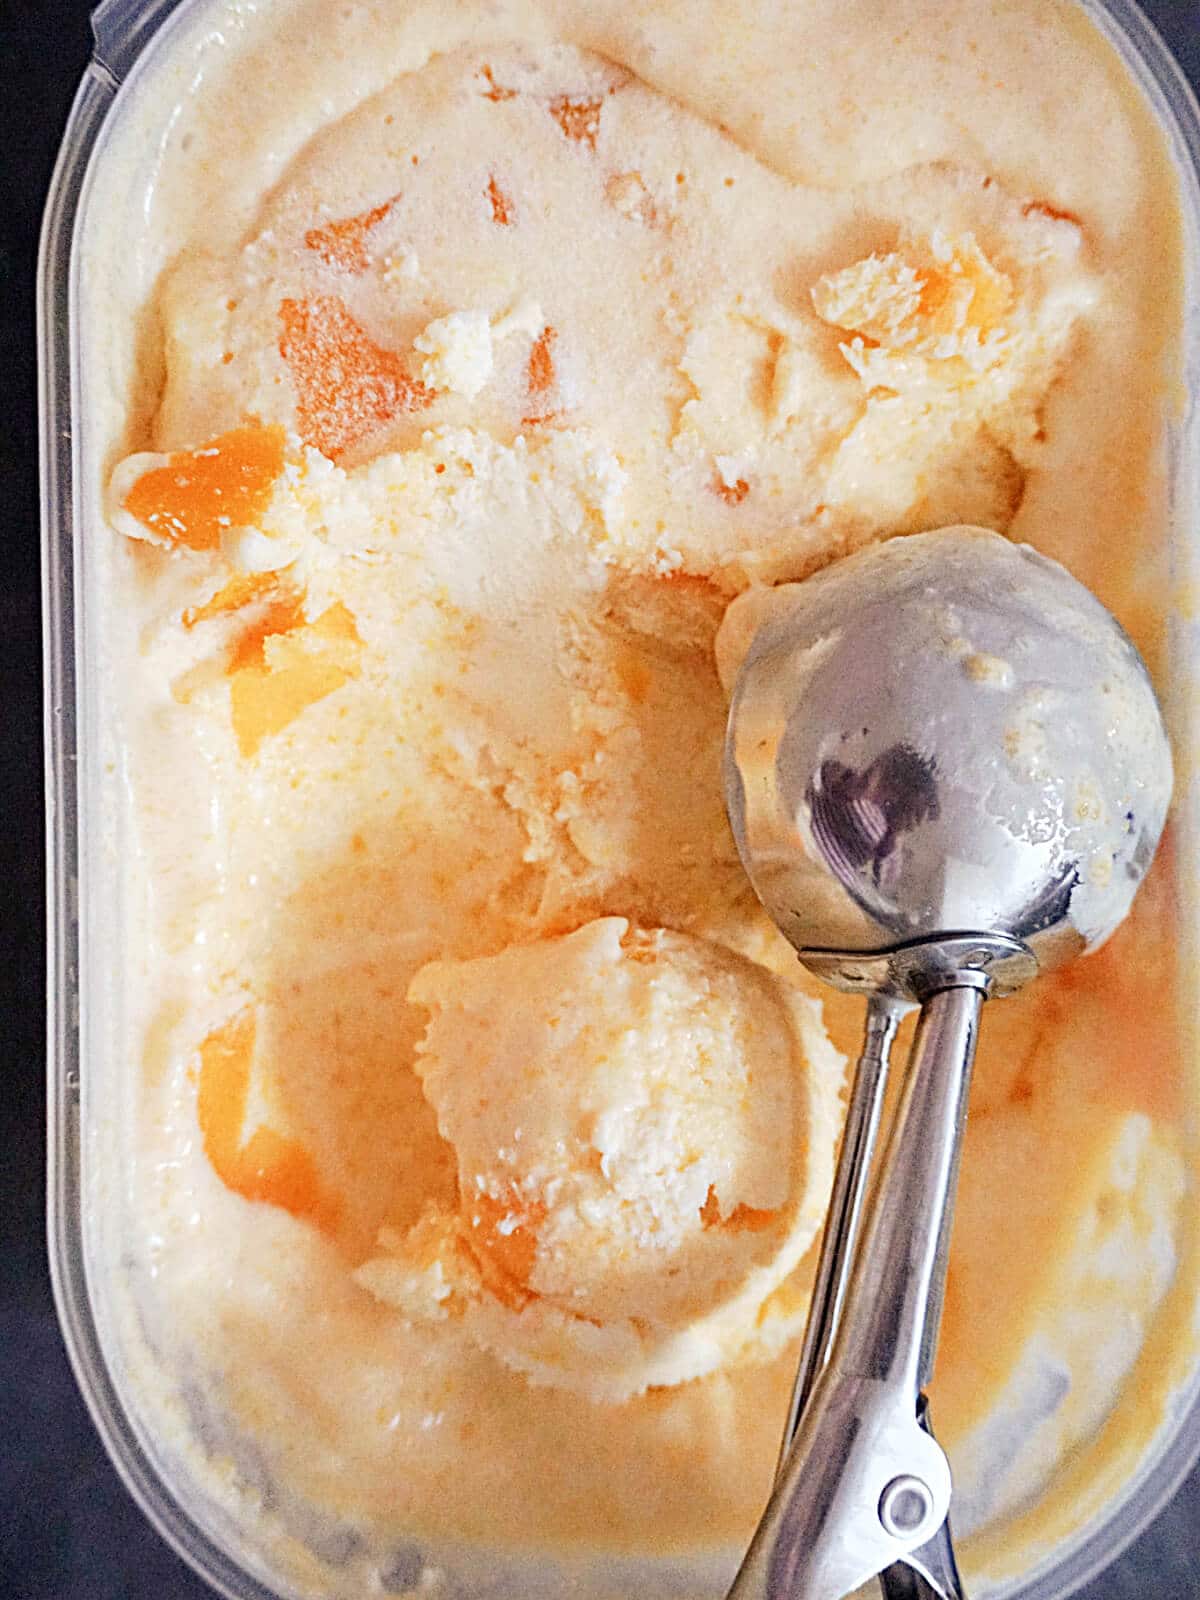 Overhead shot of a plastic container with peach ice cream and an ice cream scooper in it.